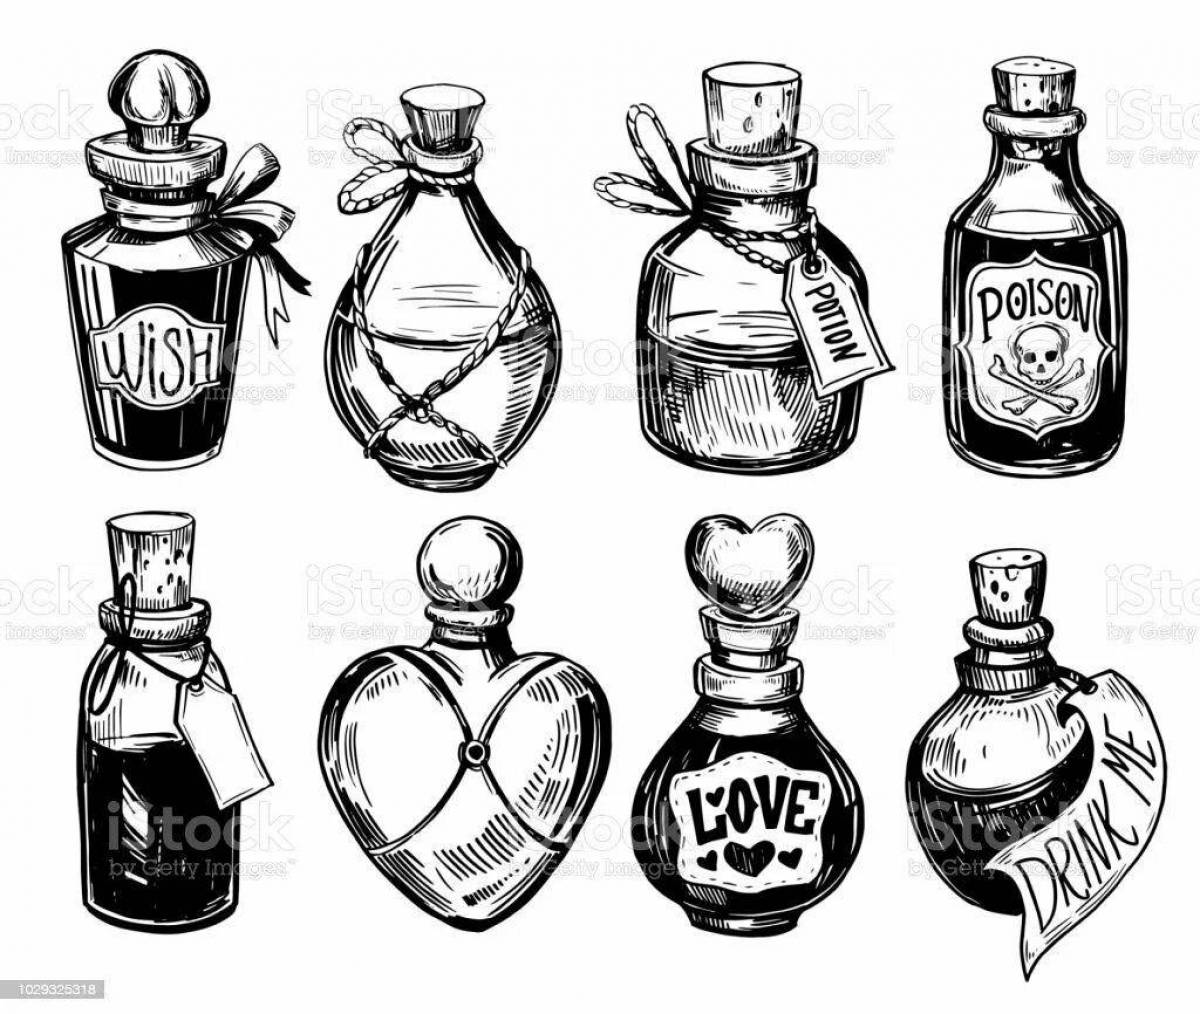 Shine potion coloring in a bottle